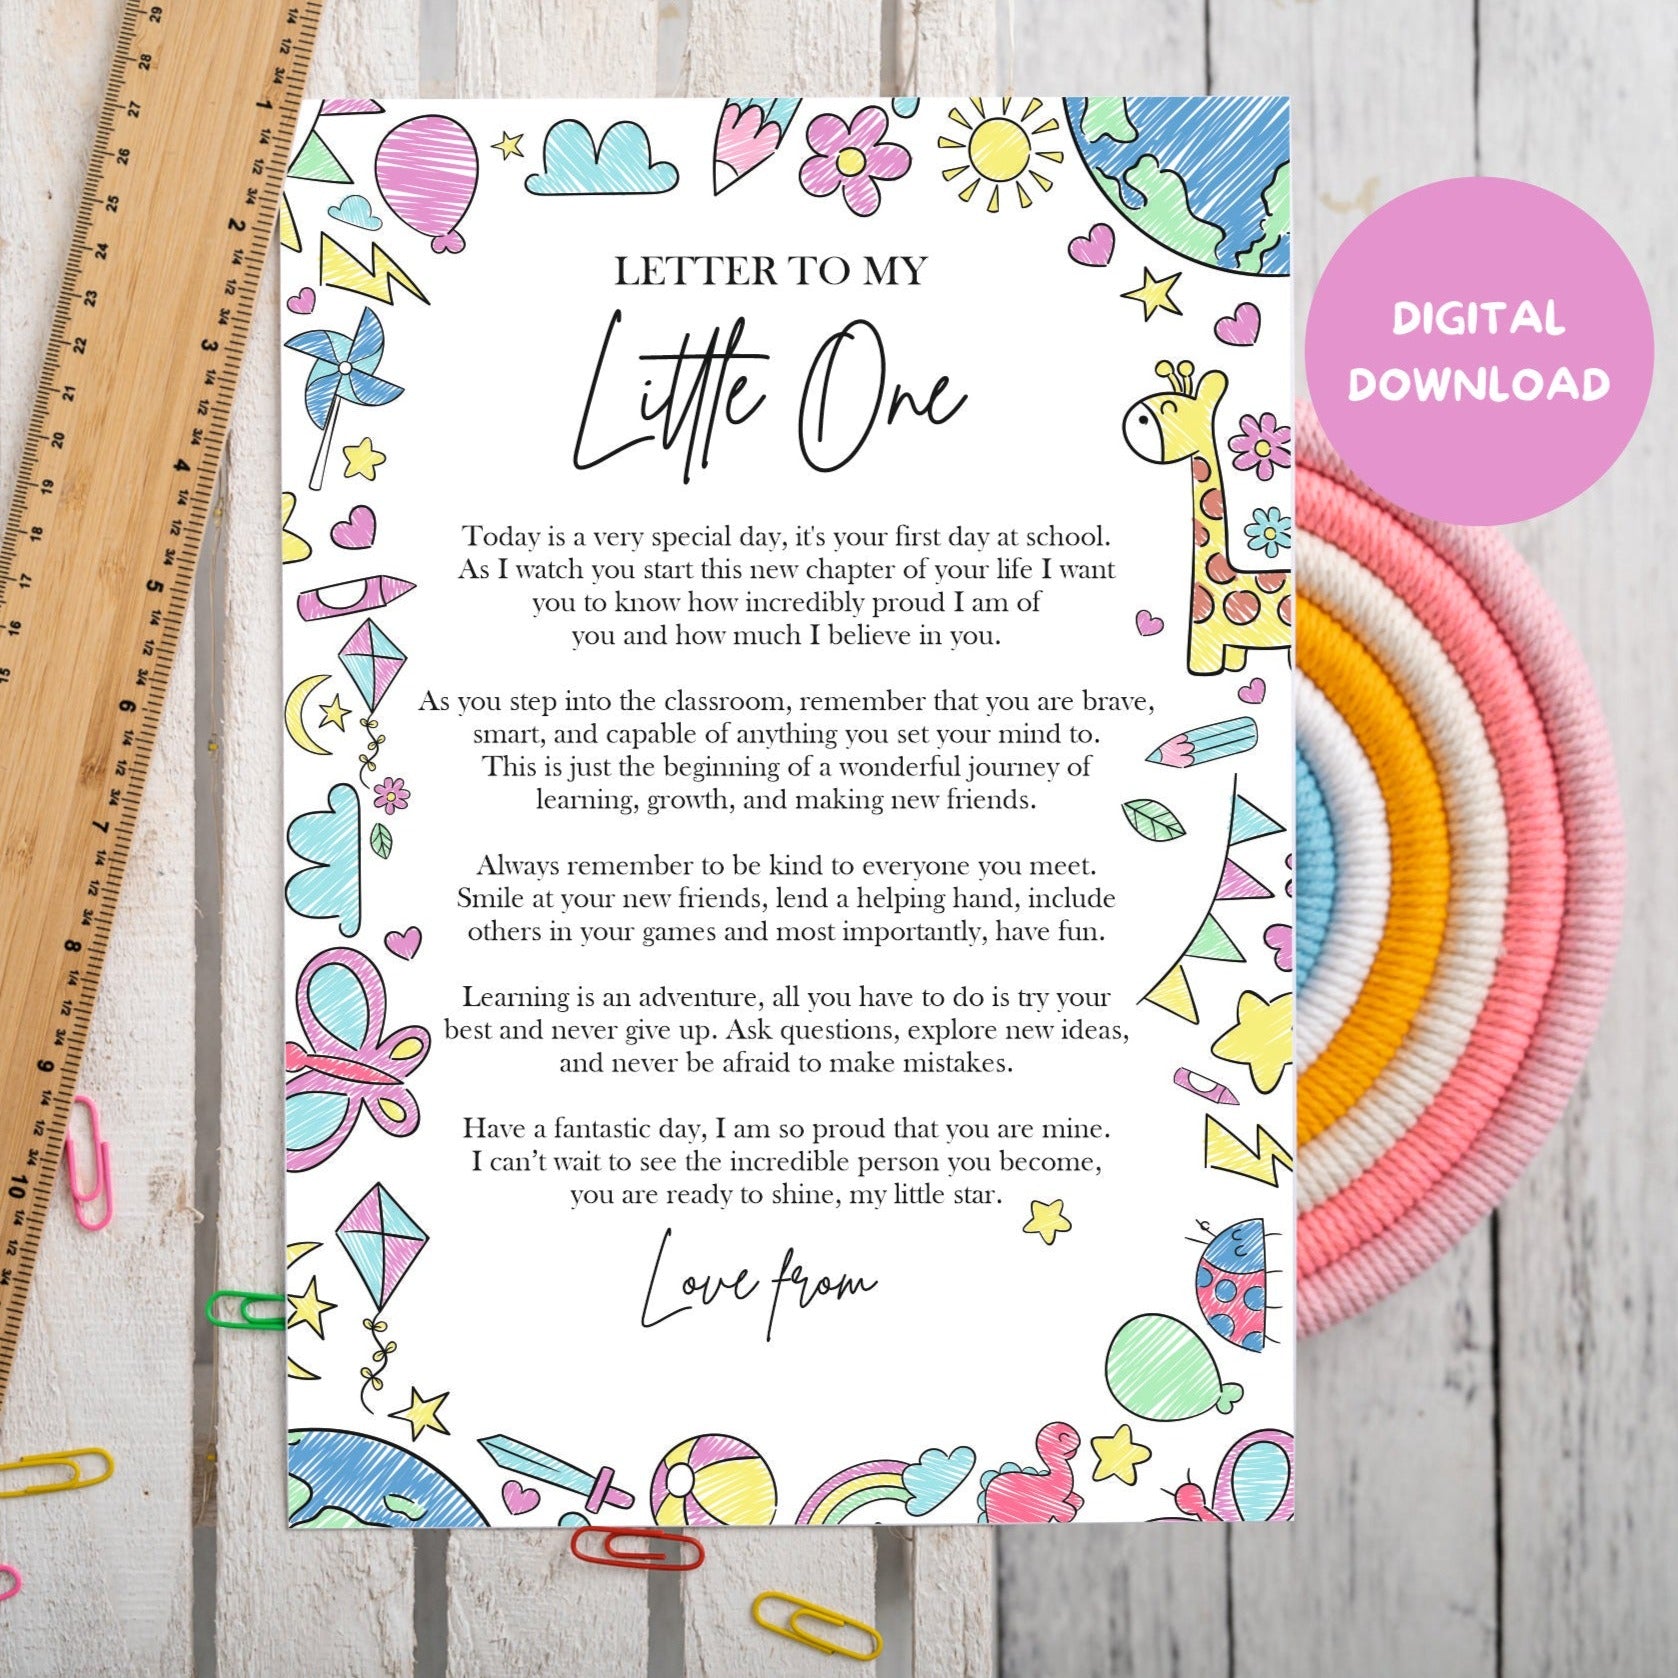 Letter to my Little One - DIGITAL DOWNLOAD